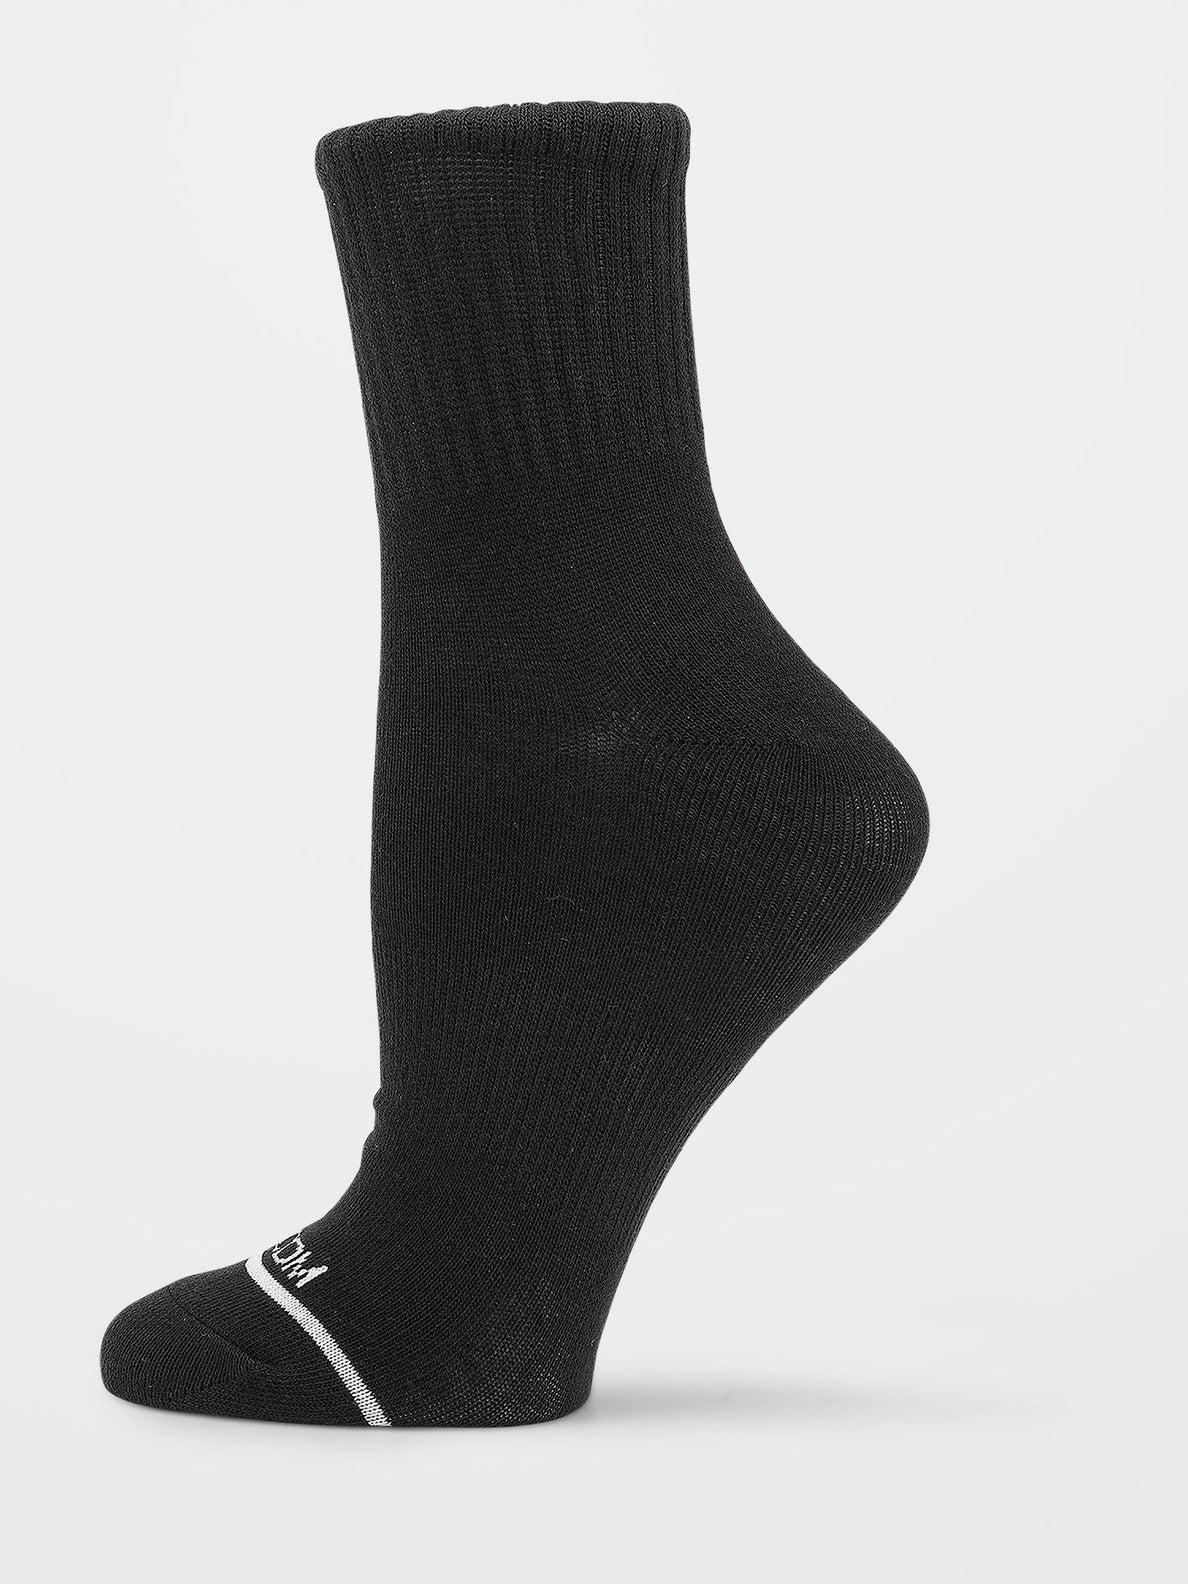 The New Crew Socks (3 pack) - ASSORTED COLORS (E6332200_AST) [1]